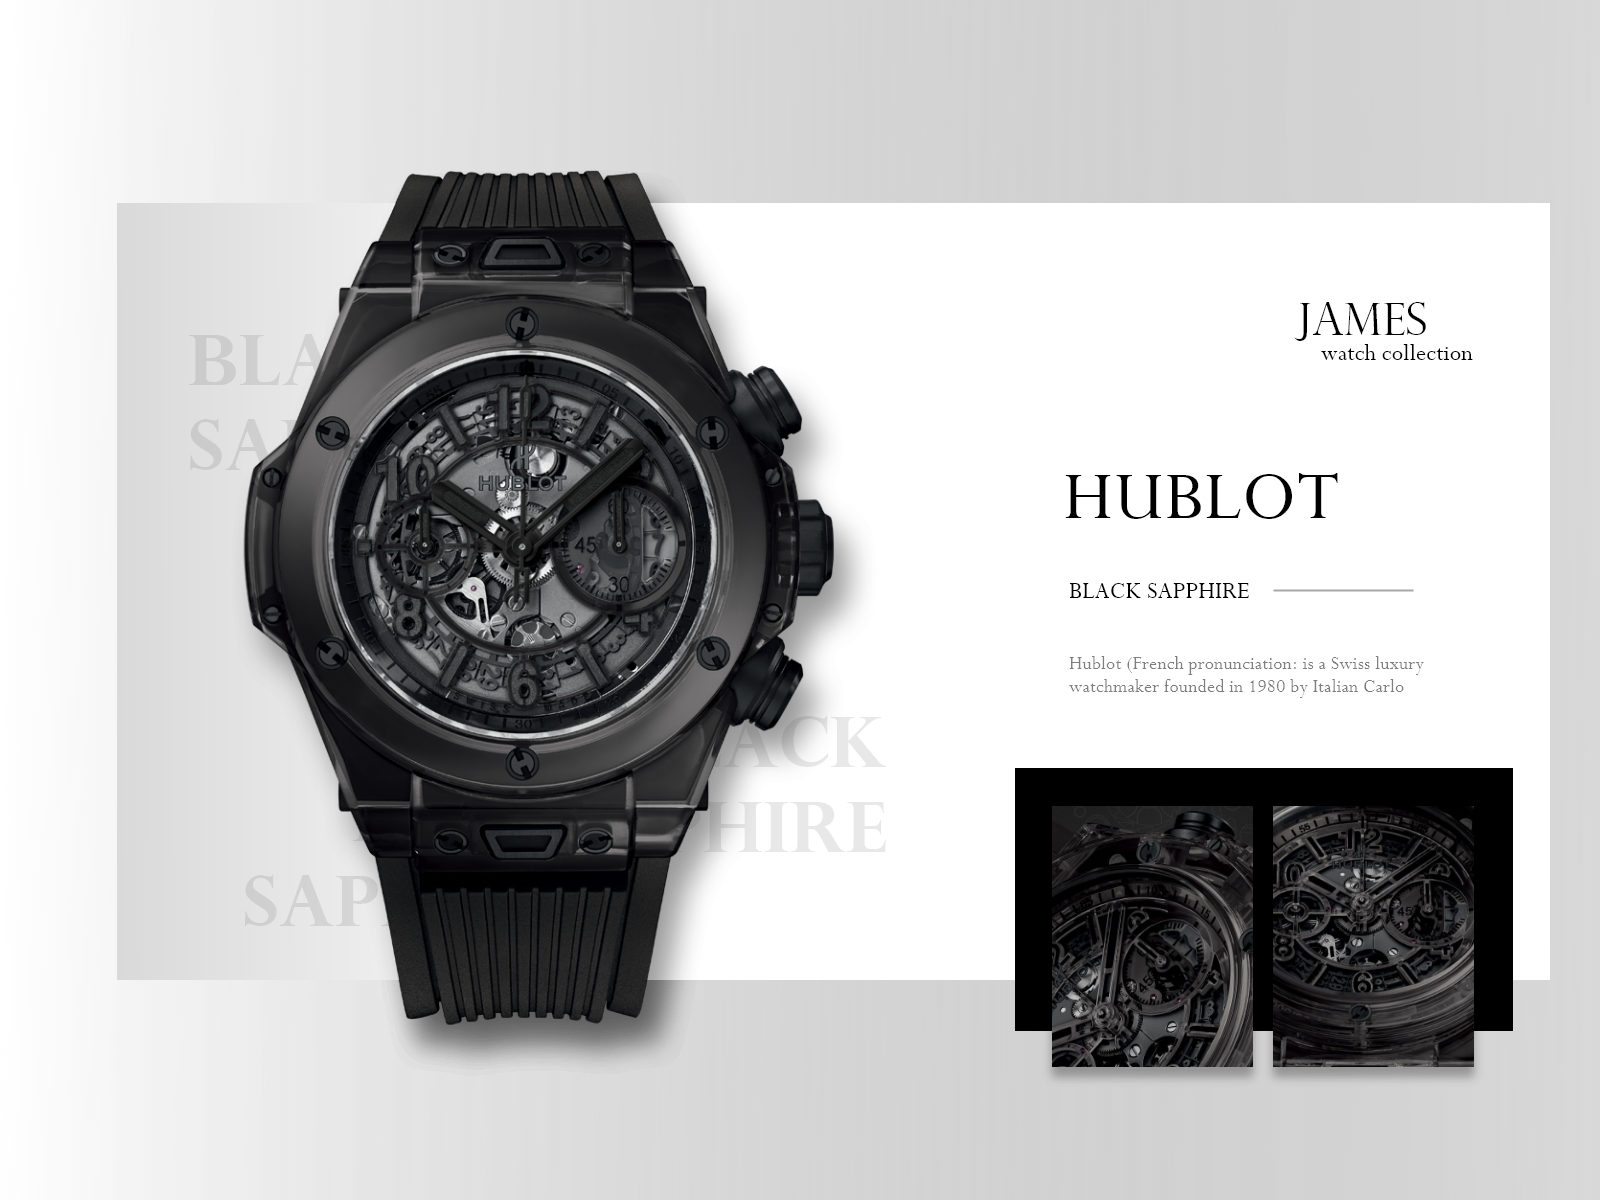 Watch Collection by Nizek on Dribbble